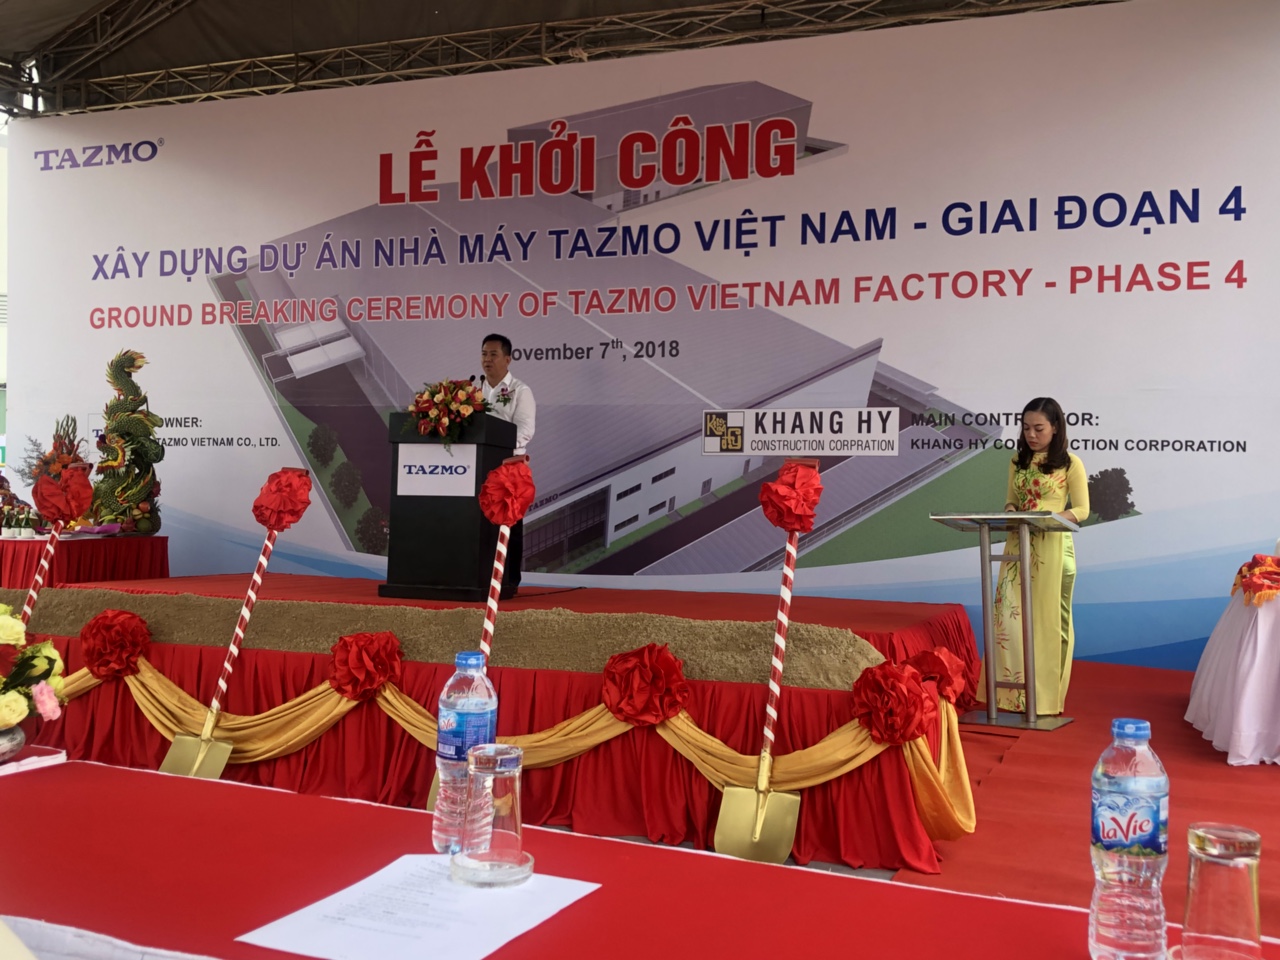 TAZMO VIET NAM FACTORY - PHASE 4